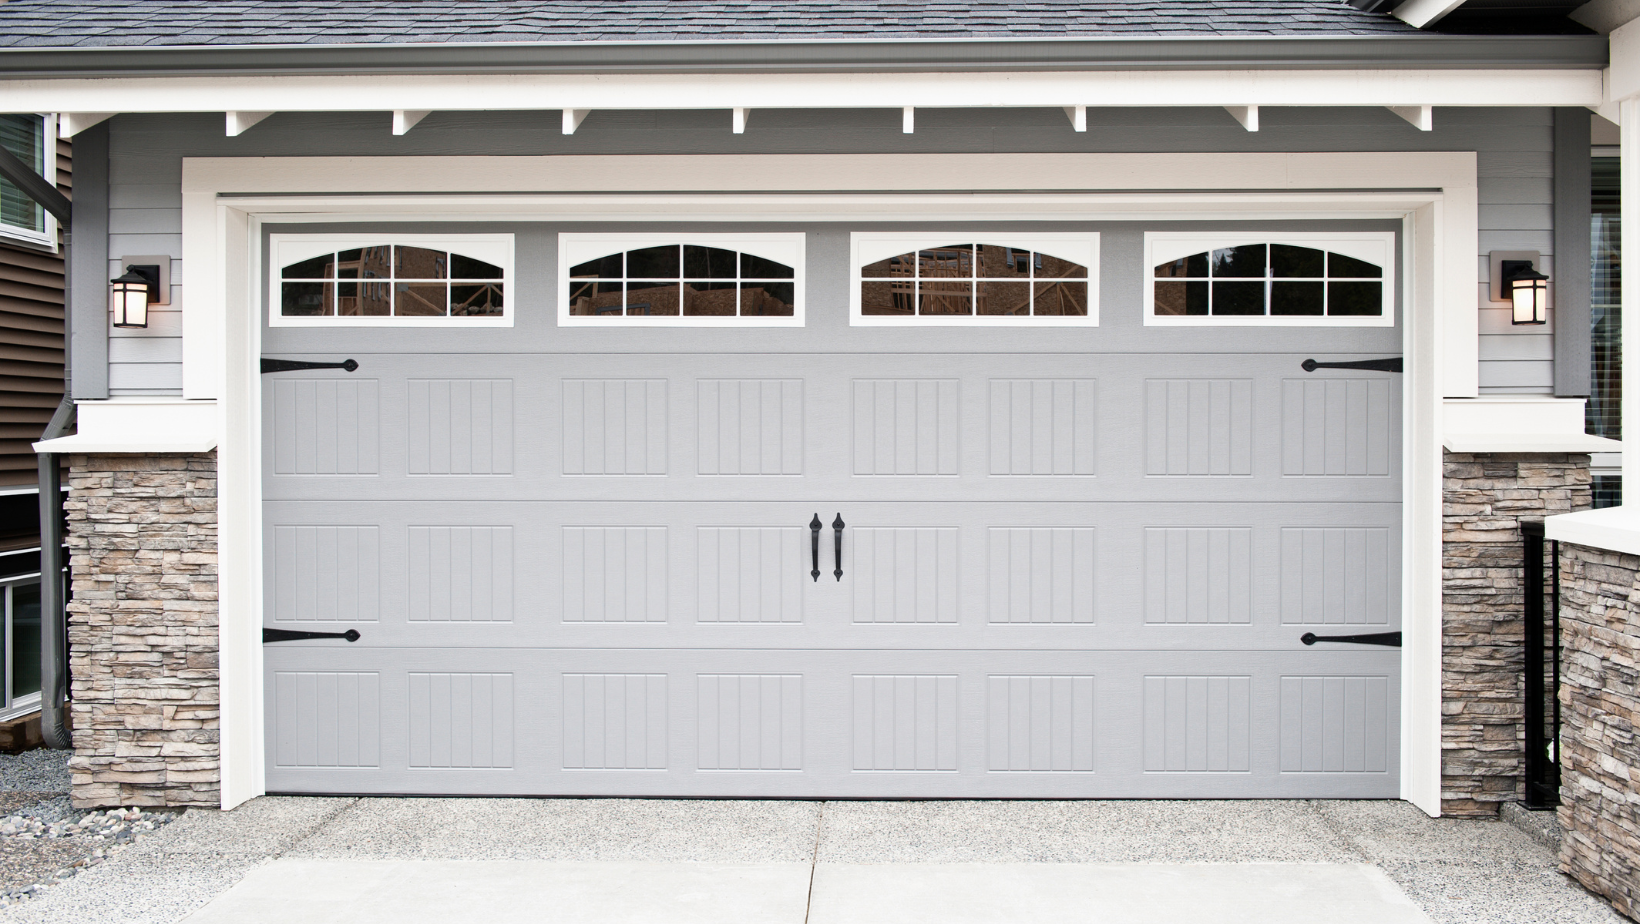 The Pros and Cons of Painting Your Home's Garage Door